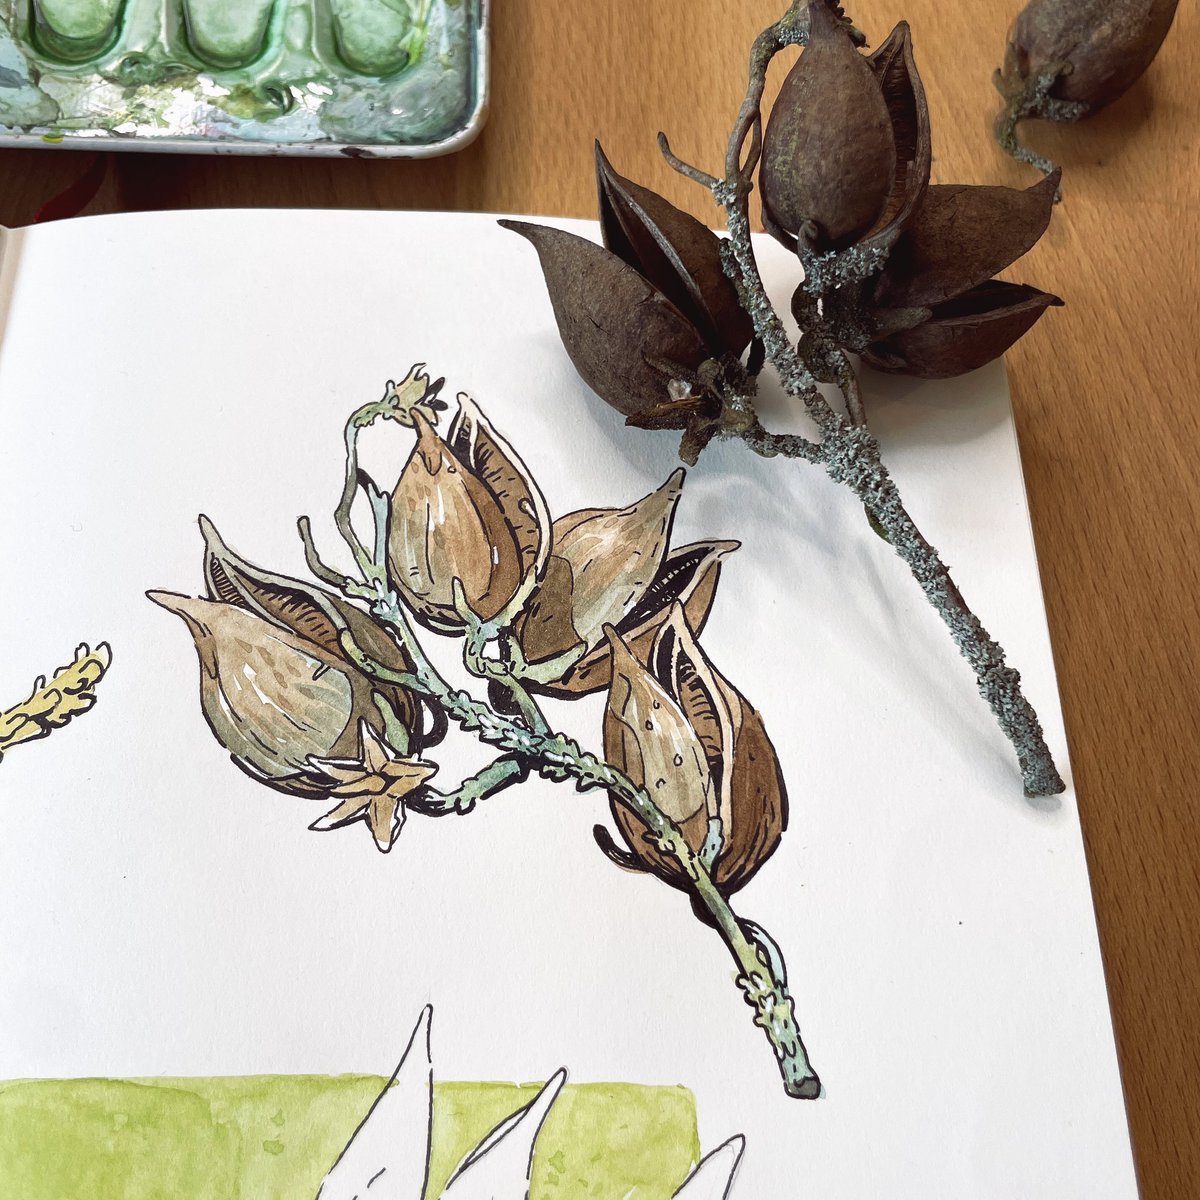 Sketchbook page with nuts and rose hips 🌱wich drawing is your favorite?

#natureart #inspiredbynature #sketchbook #drawing #naturedrawing